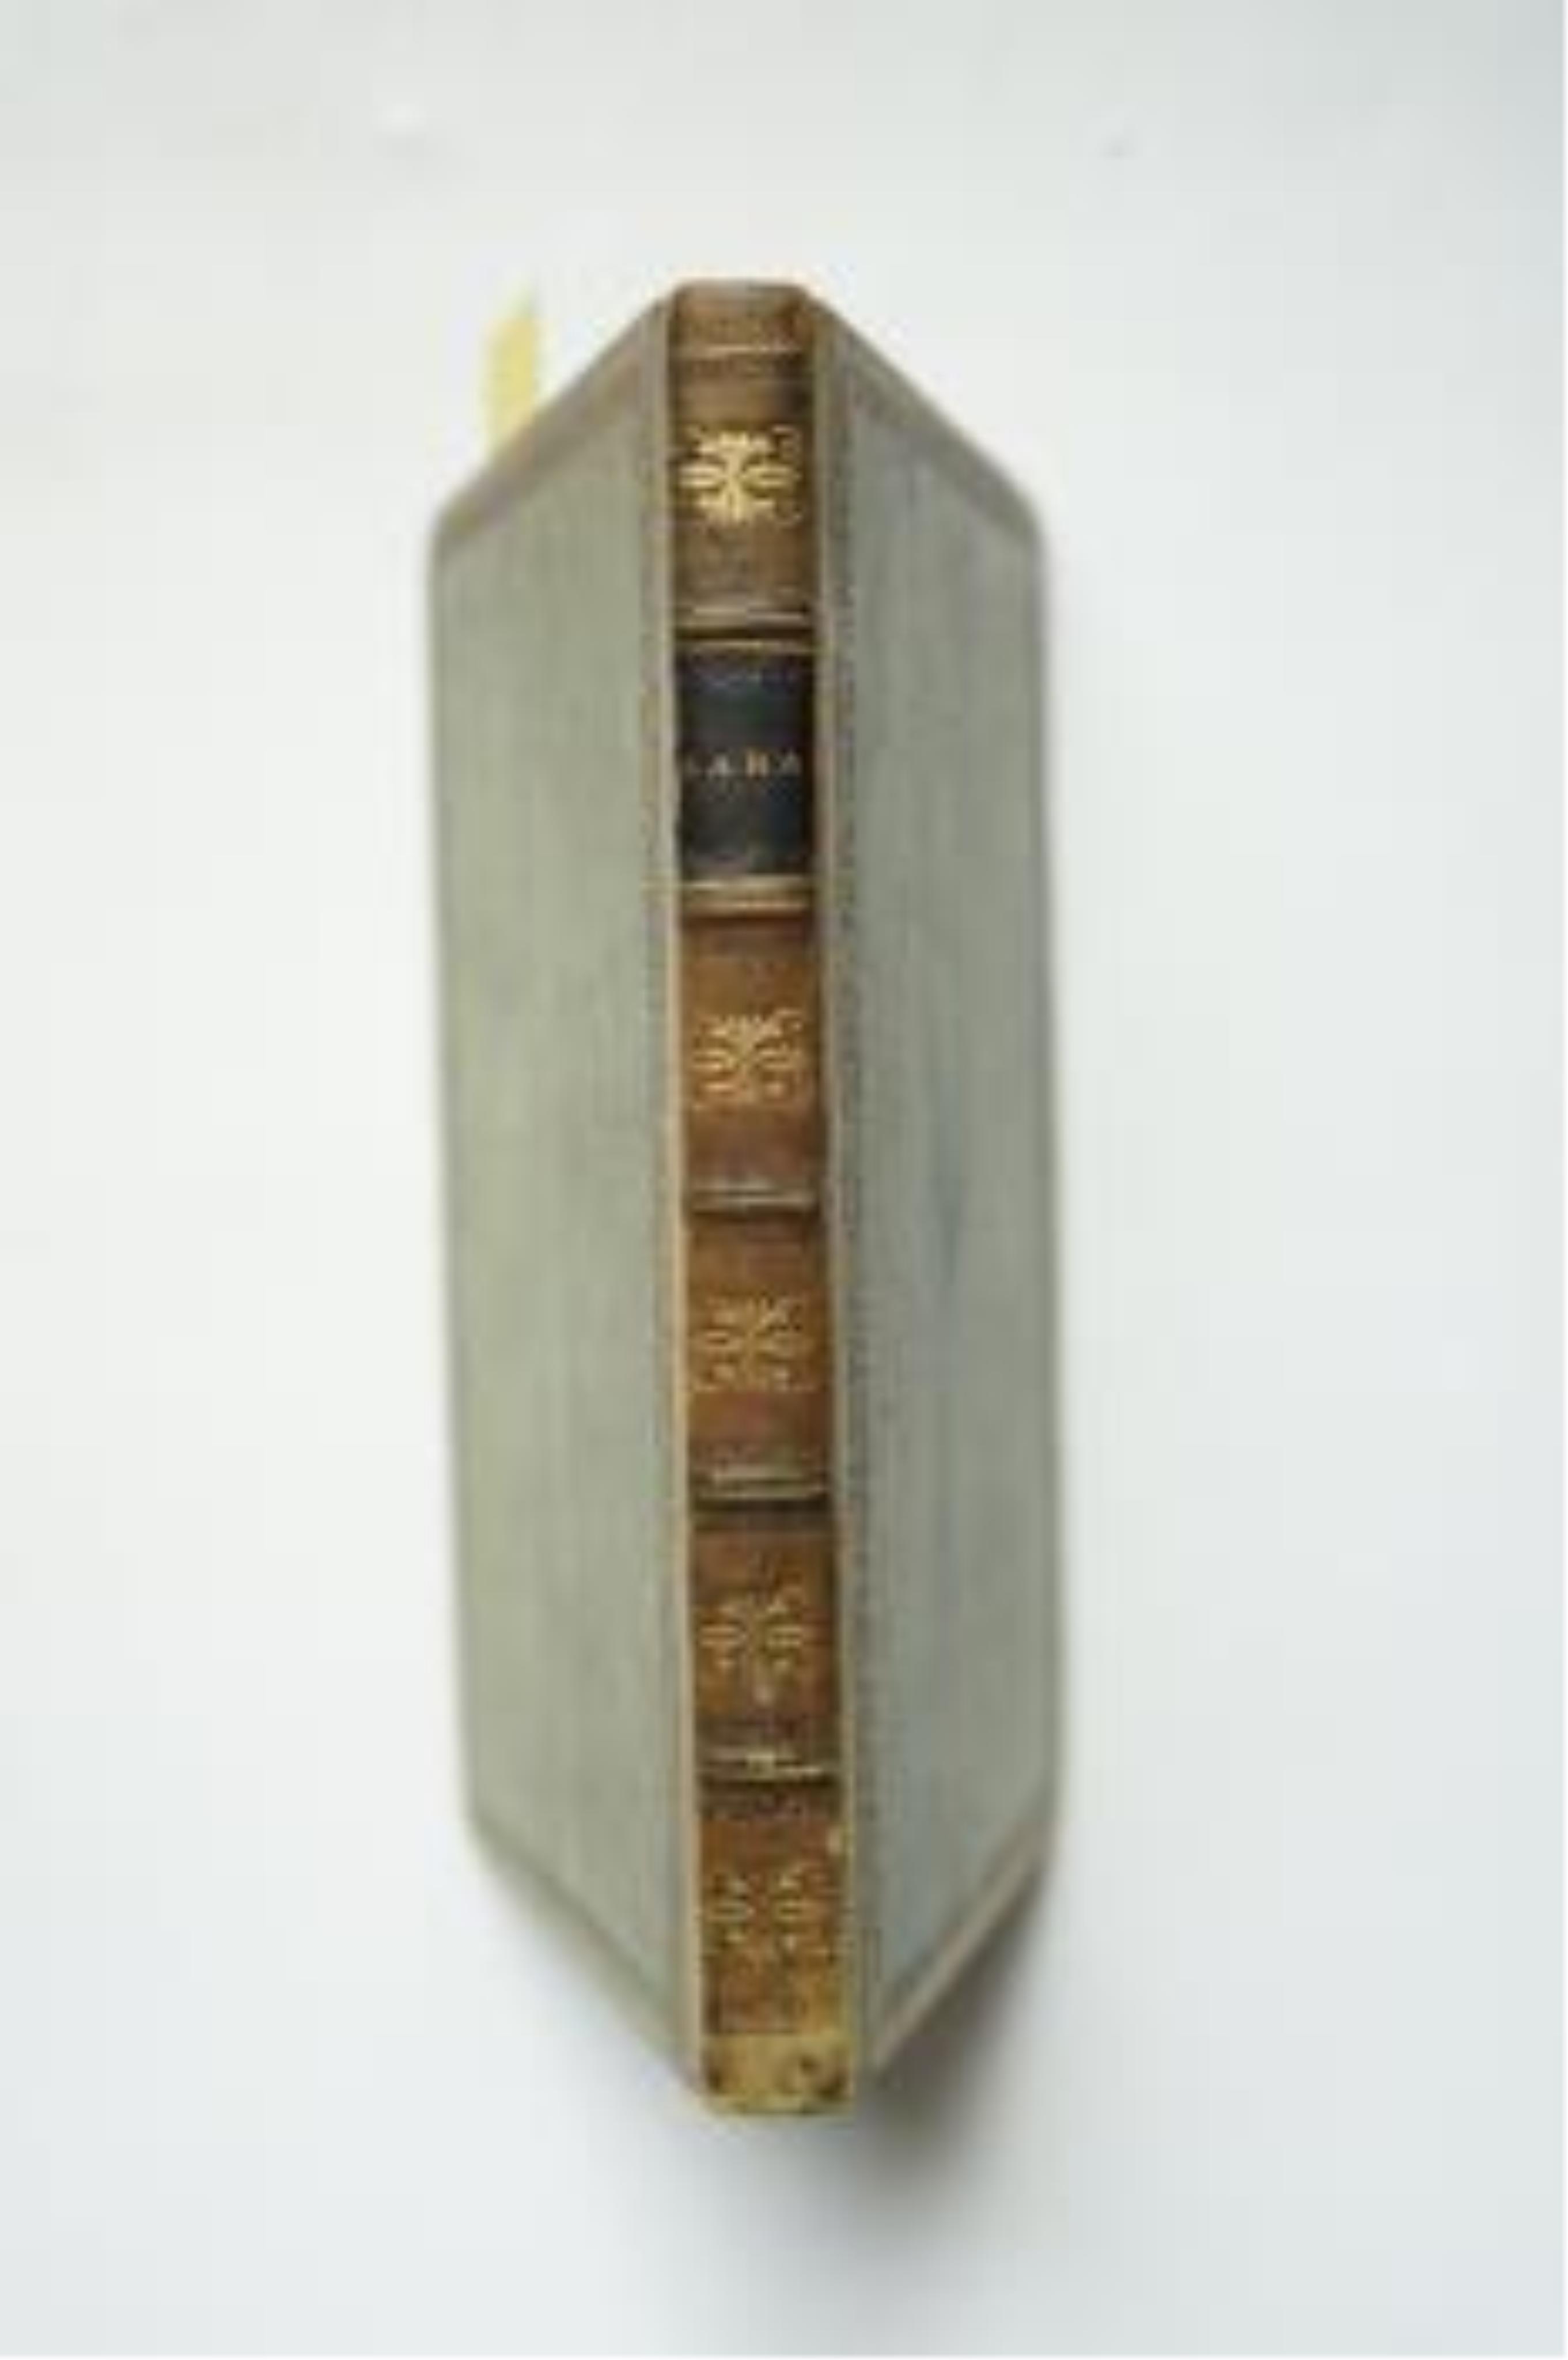 Medwin, Thomas - Conversations of Lord Byron noted During a Residence at Pisa, in the years 1821 and 1822, 2 vols, 12mo, half calf, Henry Colburn and Ruchard Bentley, London, 1830; another copy - 2 vols in 1, 8vo, half c